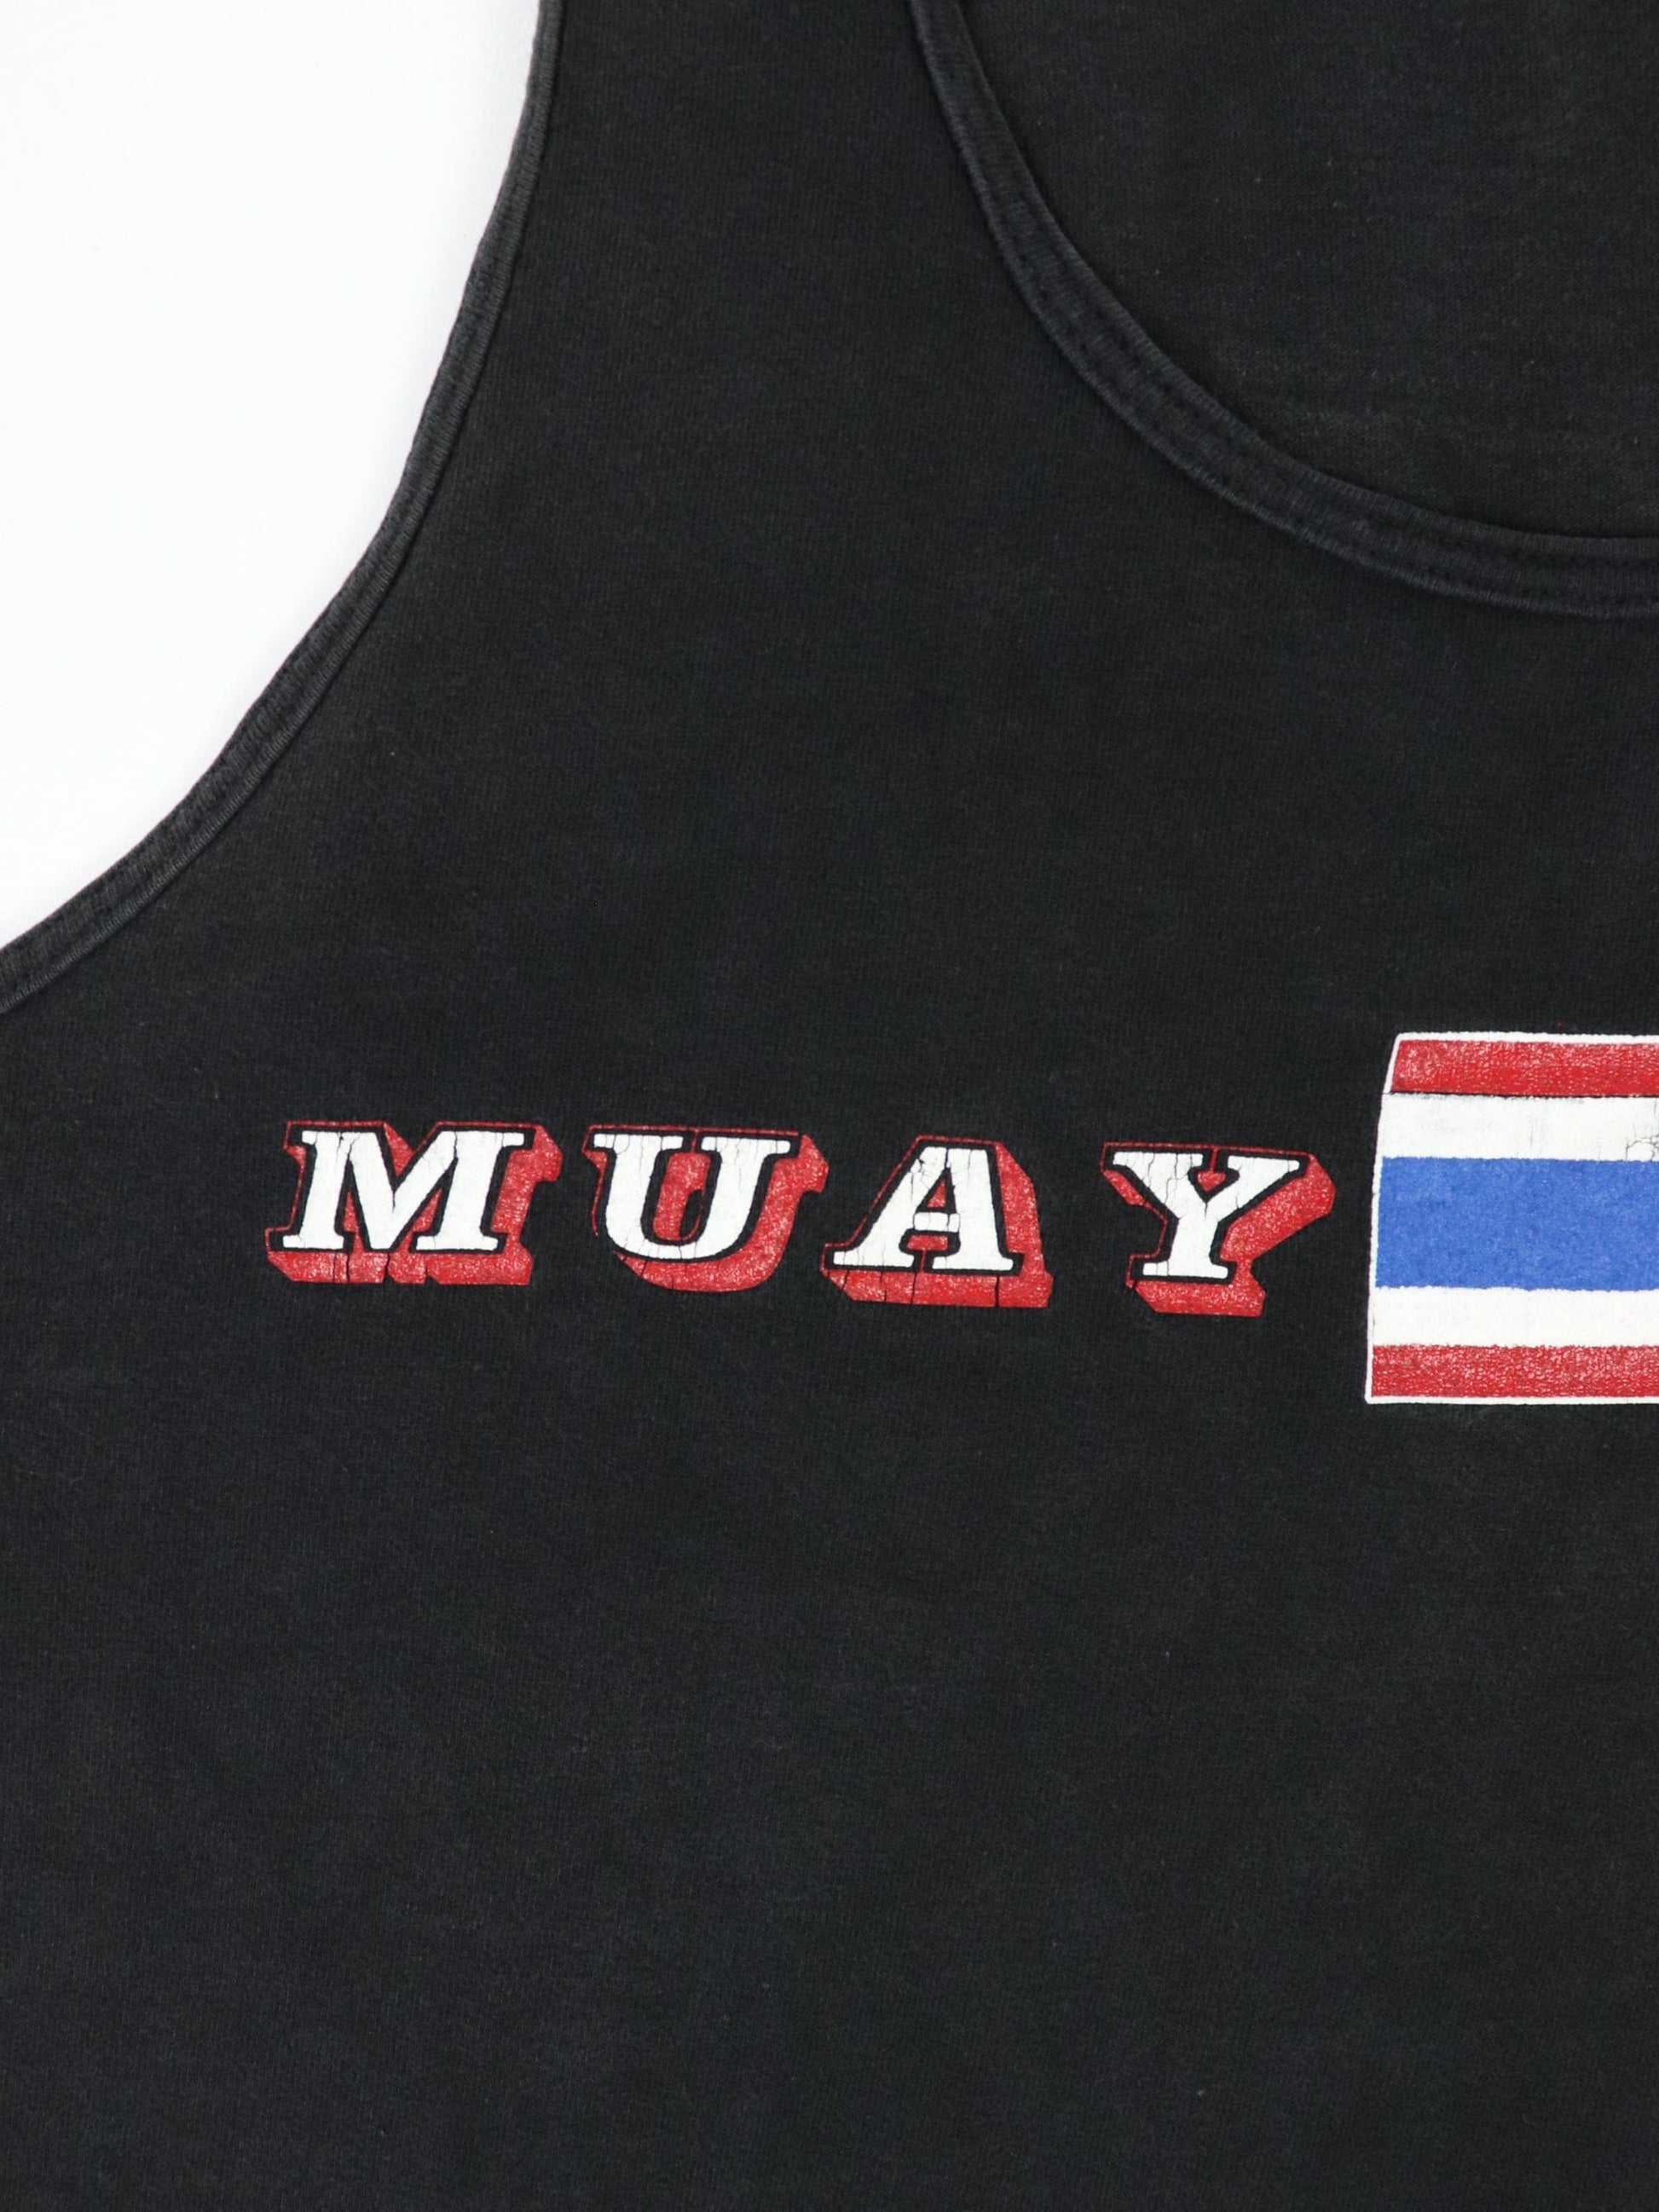 Other T Shirts & Tank Tops Vintage Muay Thai Tank Top Mens Large Black Martial Arts 90s